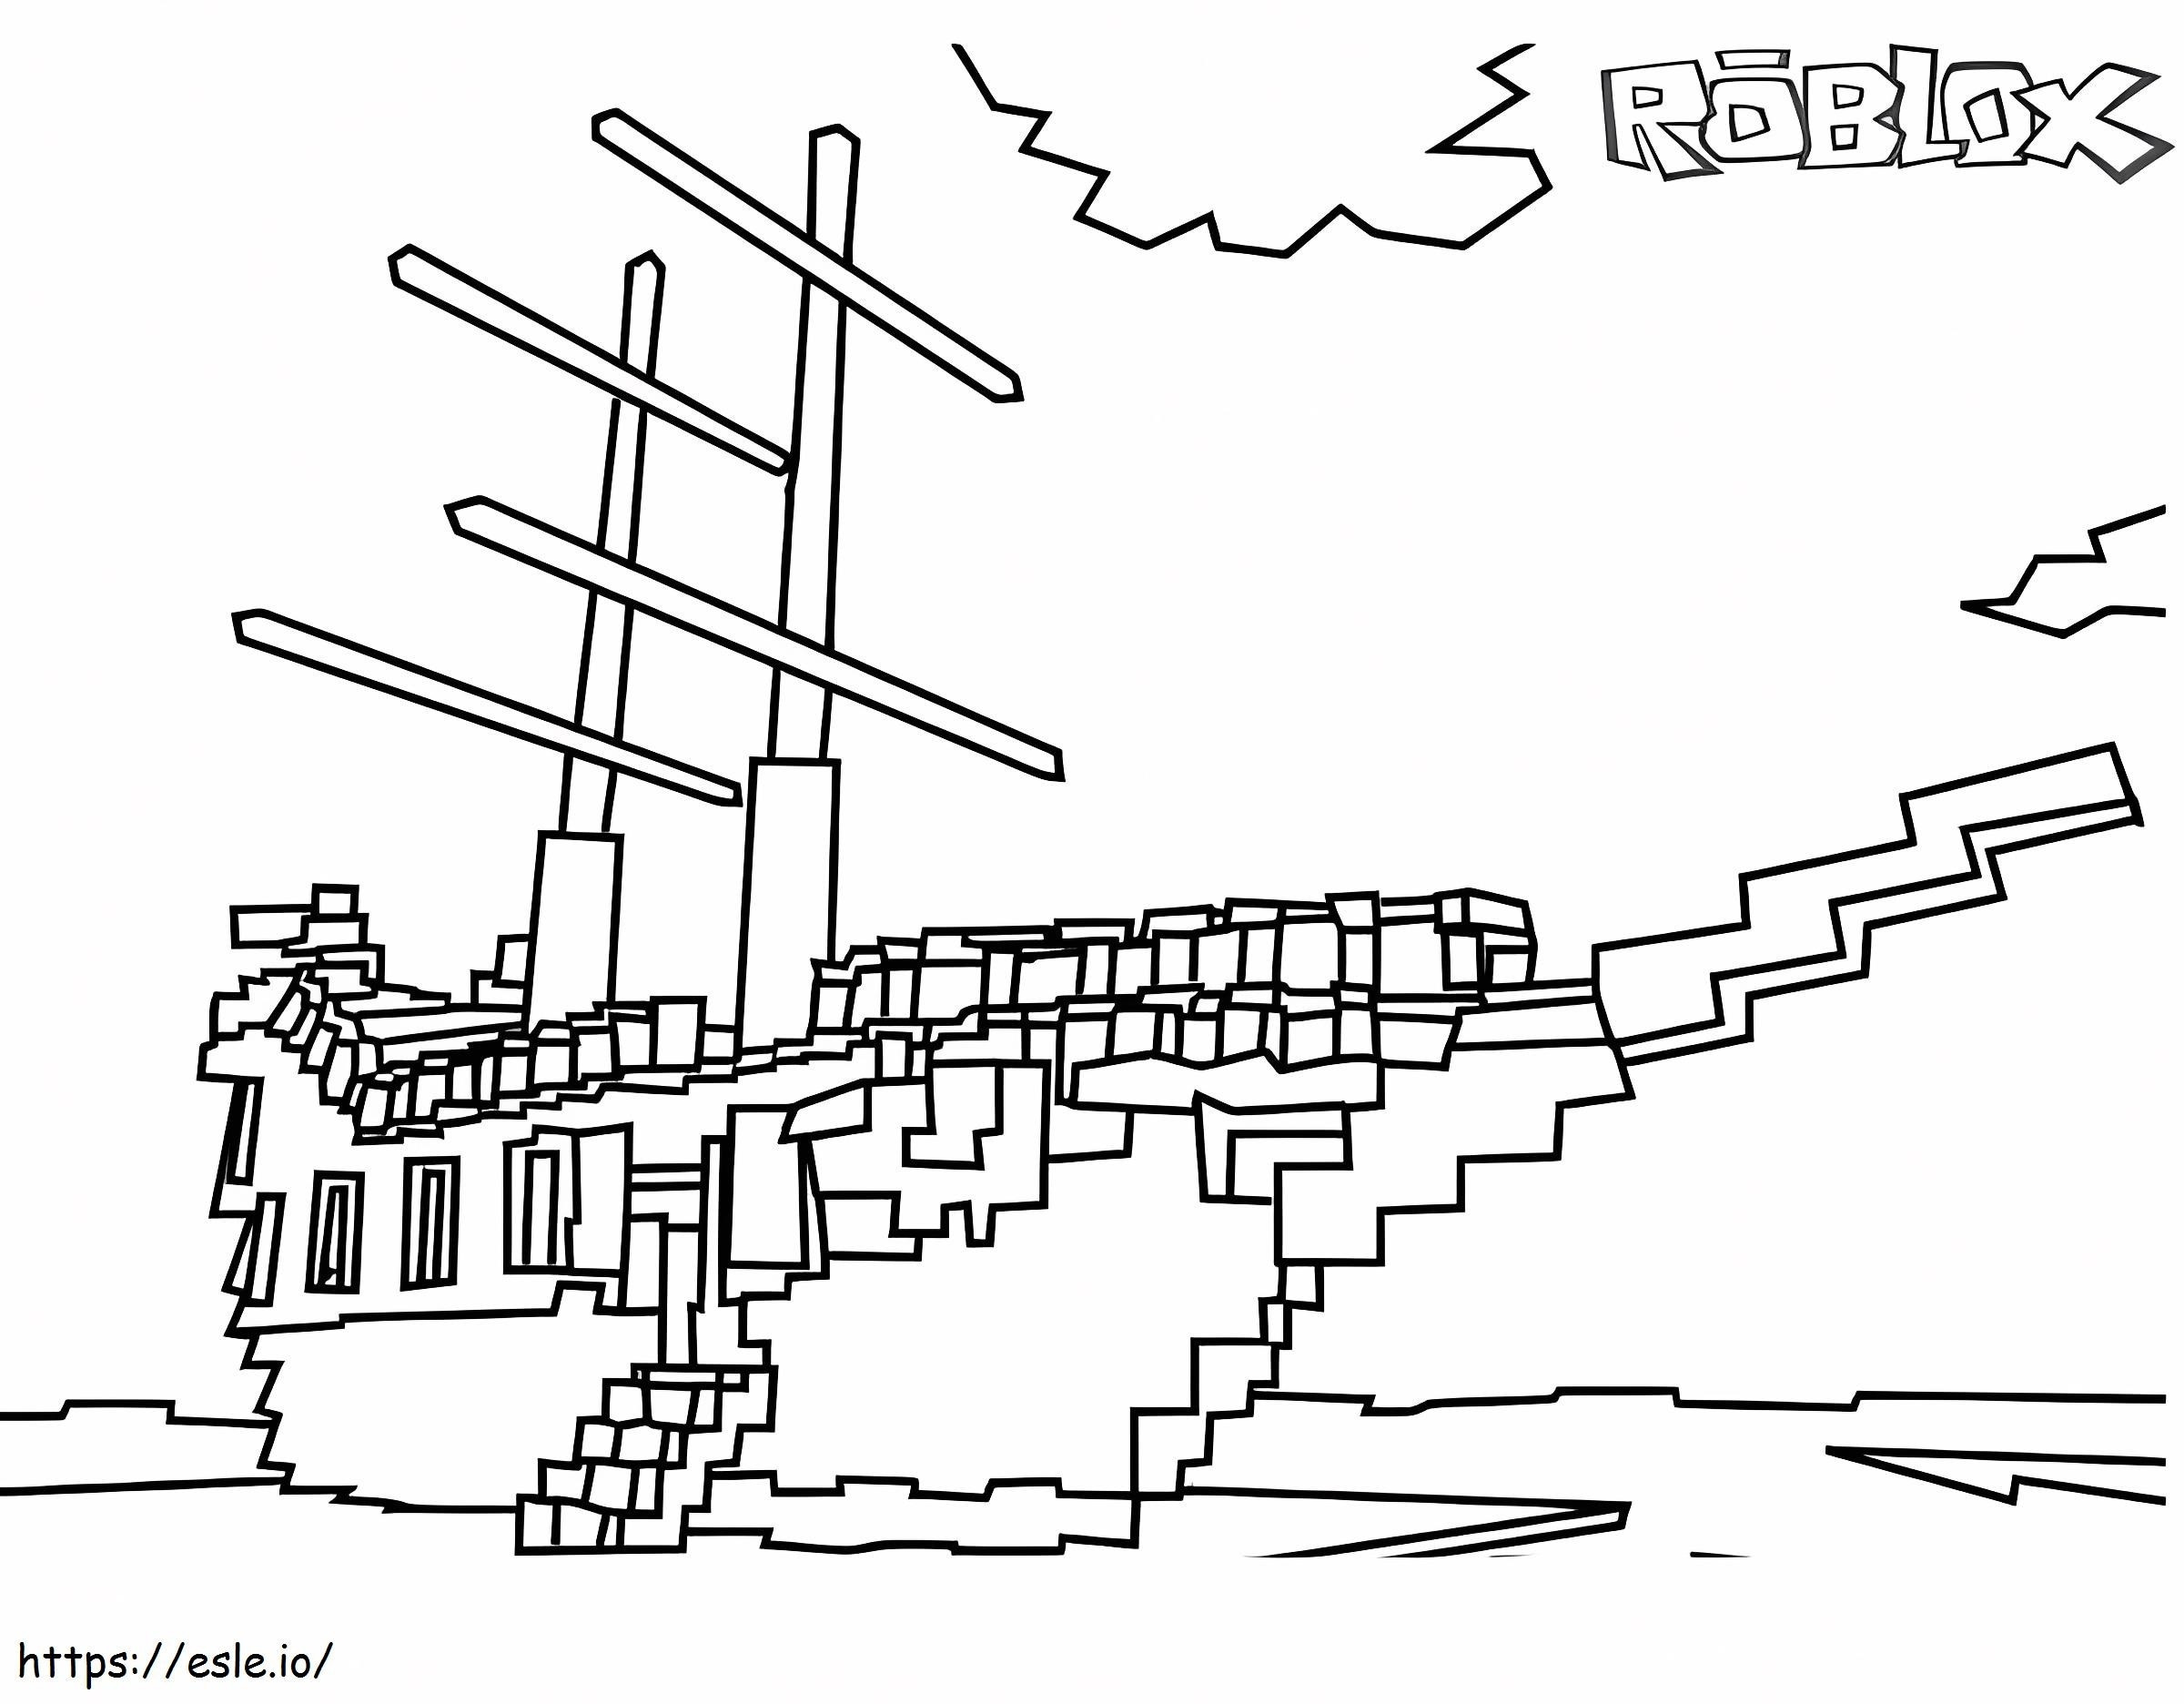 Nave Roblox coloring page